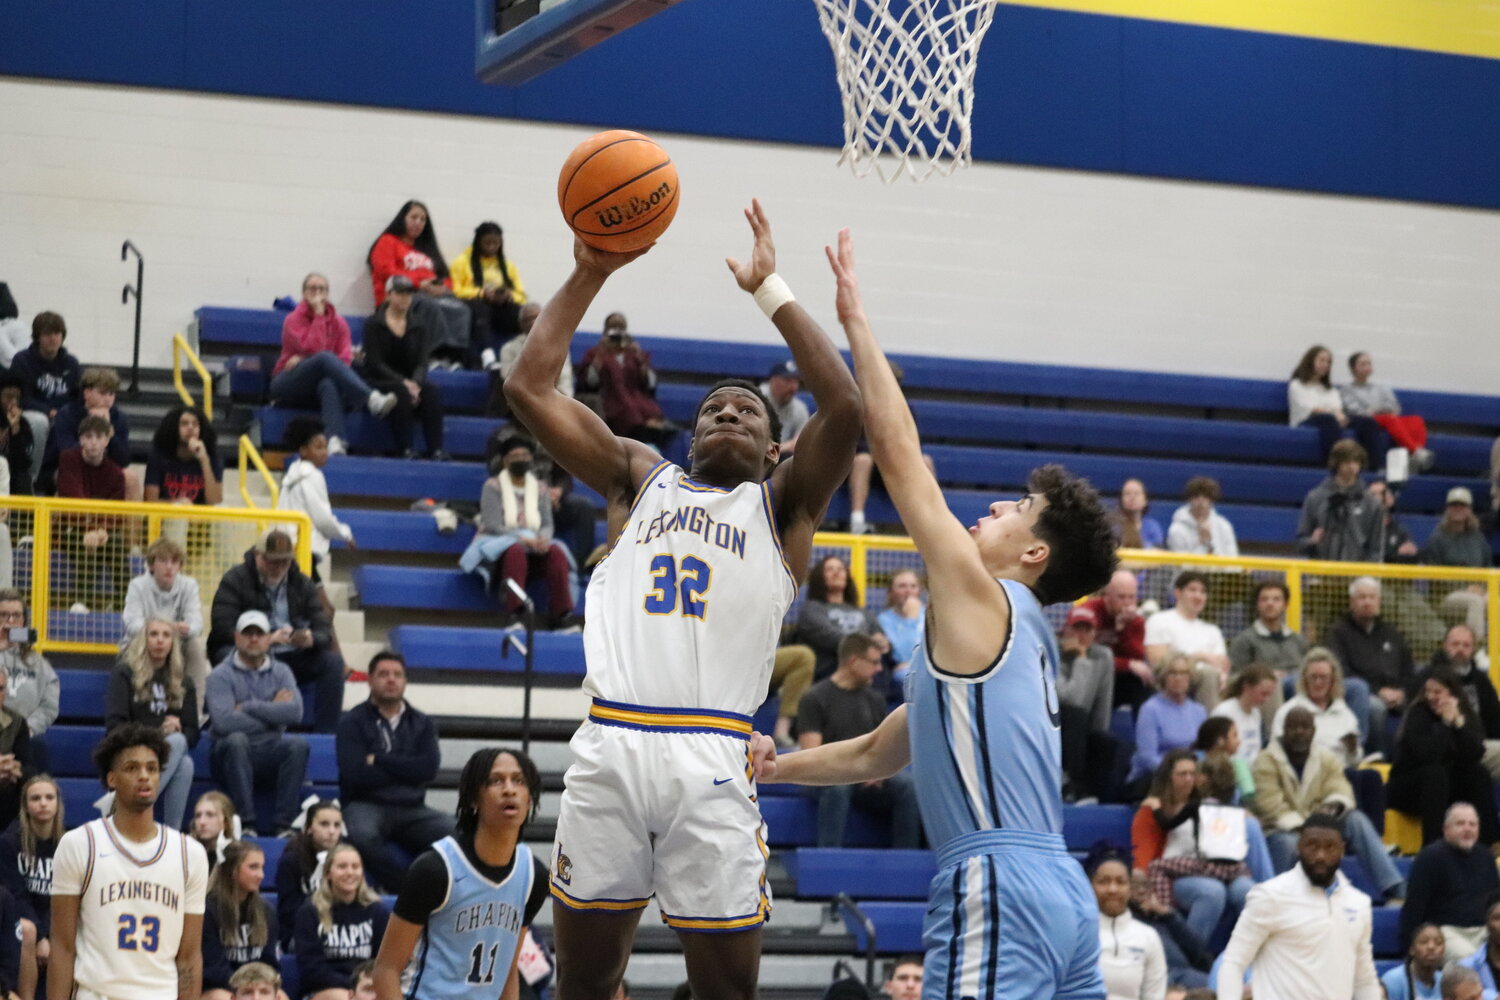 Weather delays affect beginning of region play for local basketball ...